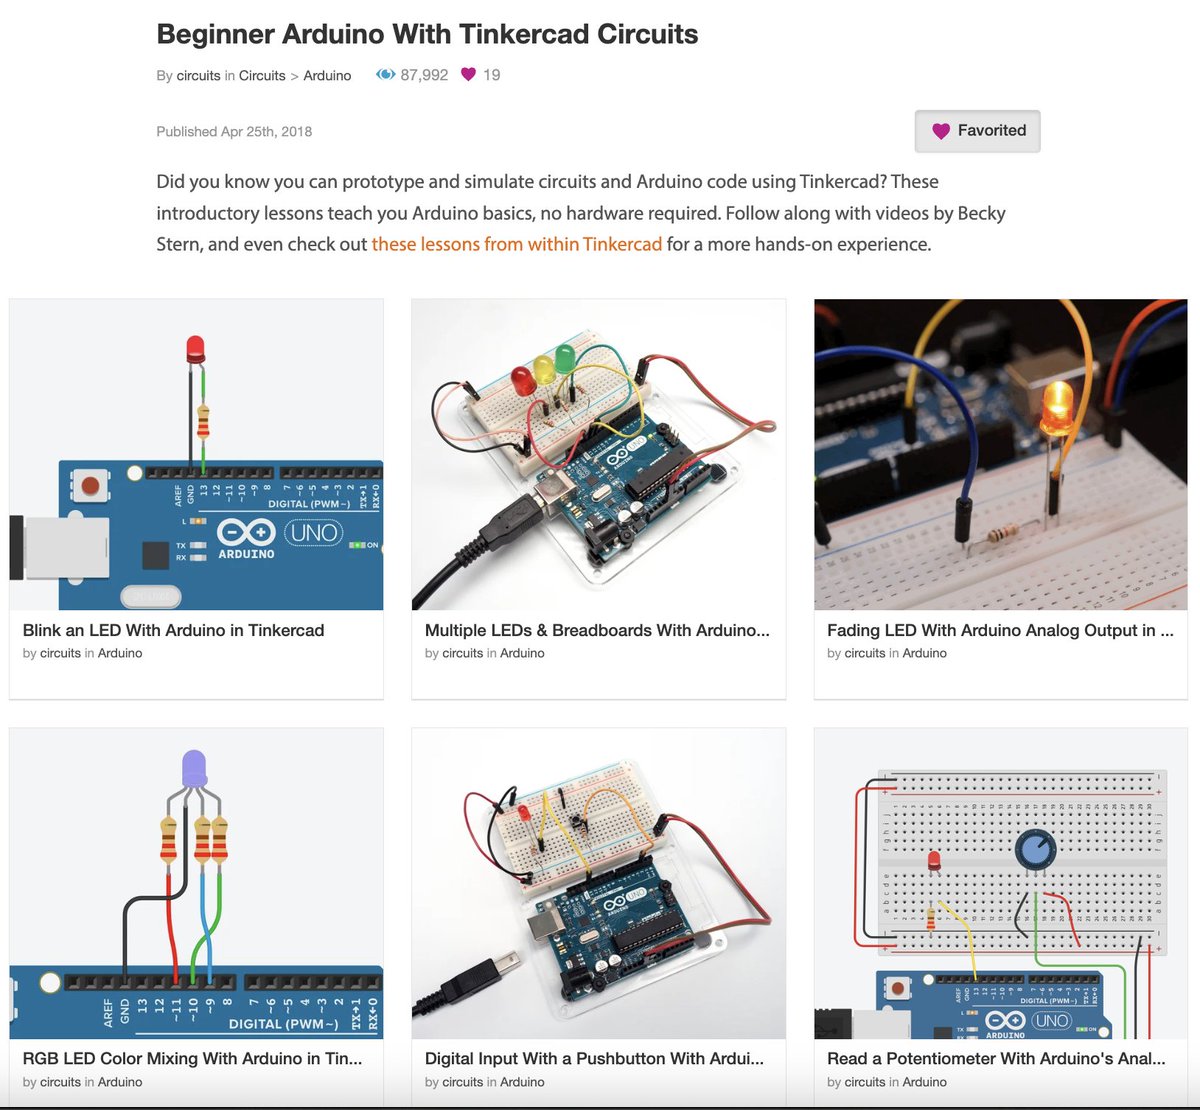 Learn the basics of Arduino with these Tinkercad Circuits projects! 

instructables.com/Beginner-Ardui… 

#TinkercadCircuits #ArduinoProjects #MadeWithTinkercad @arduino